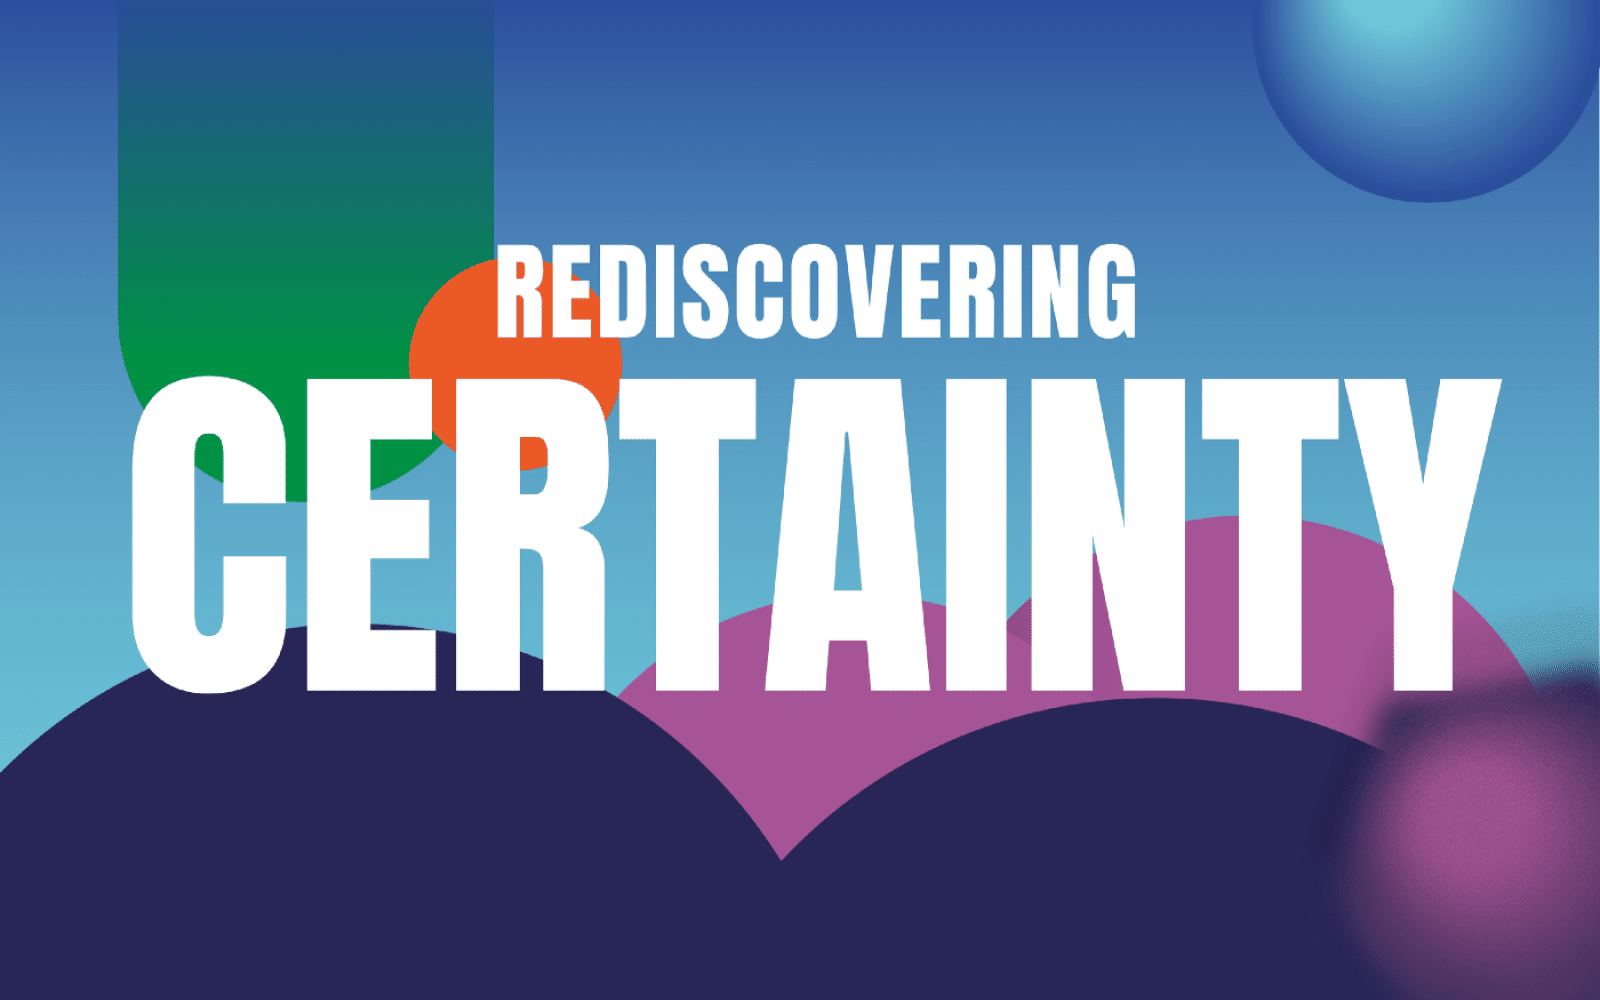 Rediscovering certainty